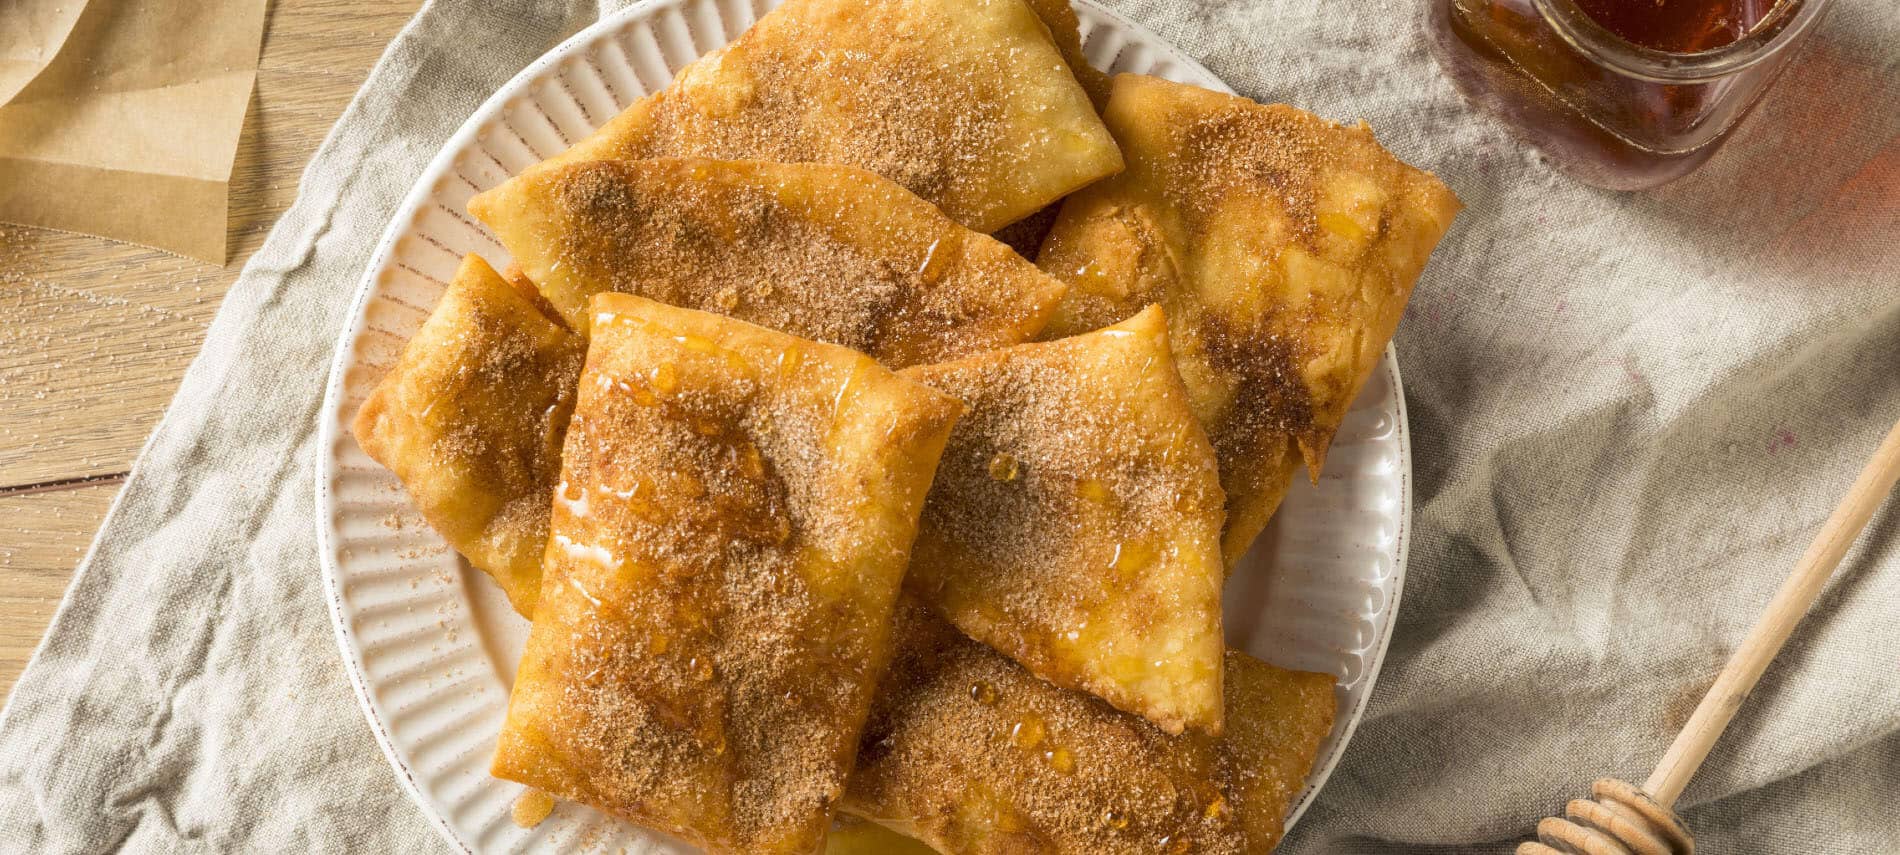 rectangular fried sopapillas sprinkled with cinammon and sugar and drizzled with honey